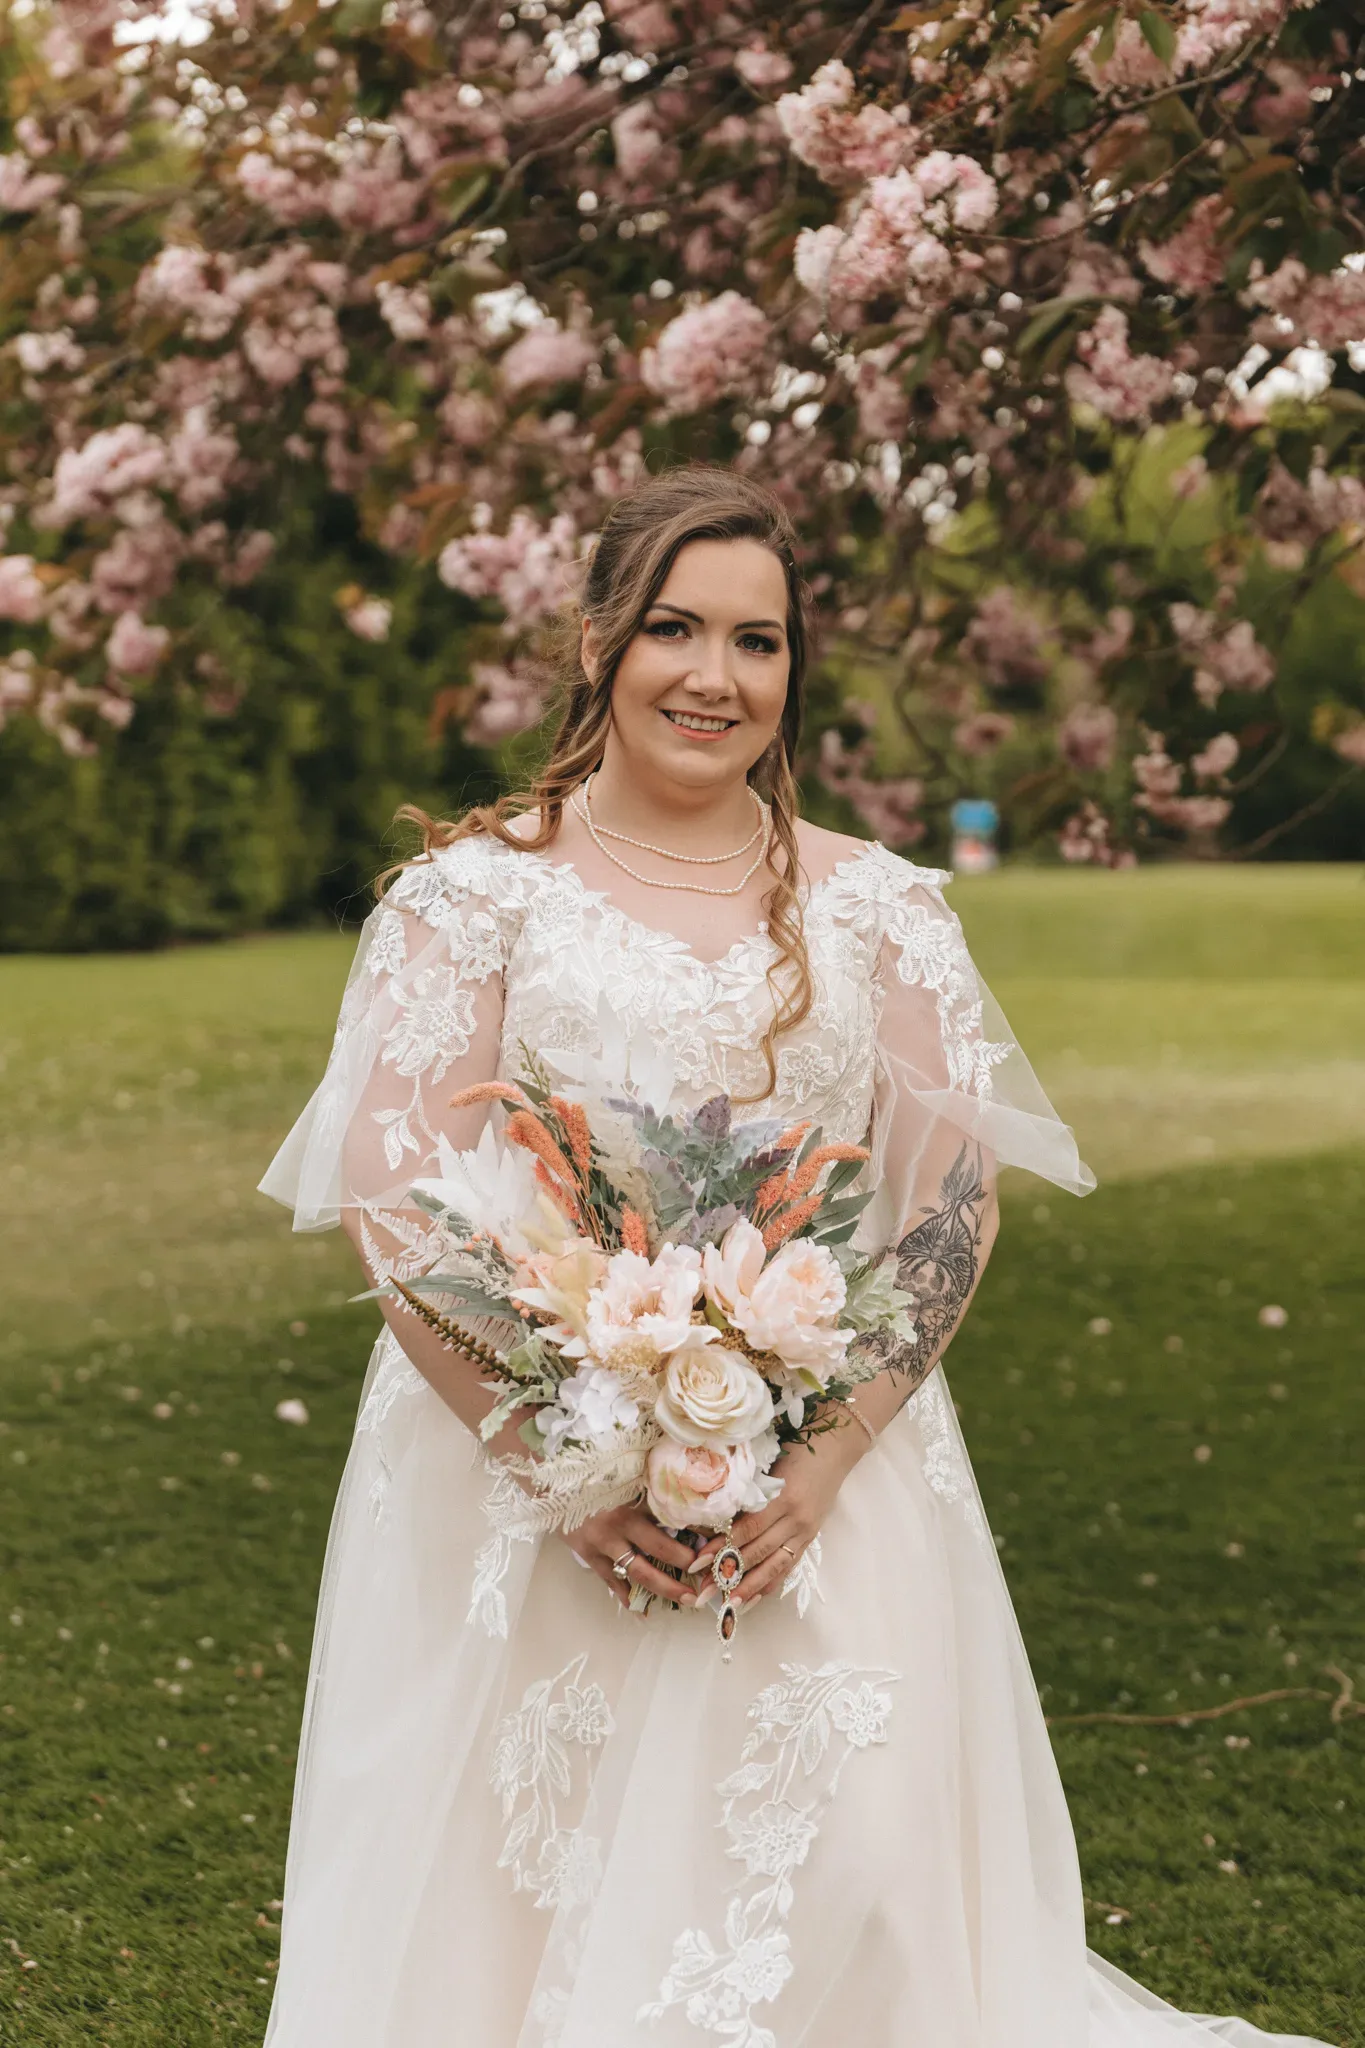 A bride stands under a blooming cherry tree, smiling at the camera. she wears a lace wedding dress and holds a bouquet of pink and peach flowers. her tattooed arms are partially visible.